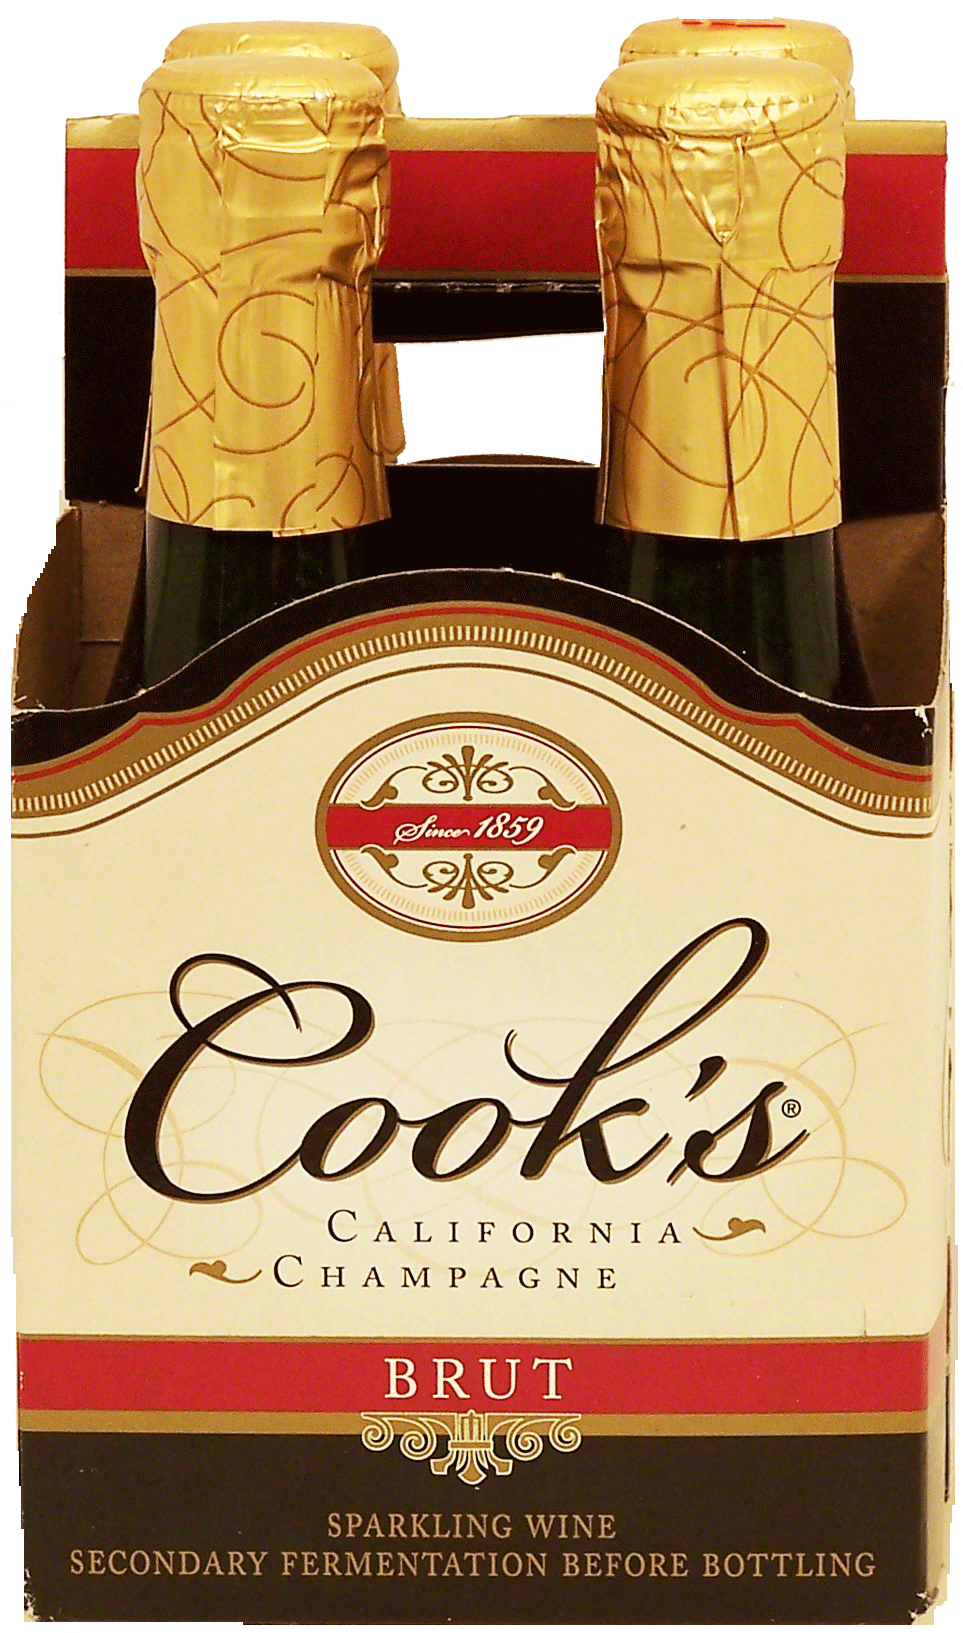 Cook's Brut champagne, sparkling wine of California, 11.5% alc. by vol., 187-ml bottles Full-Size Picture